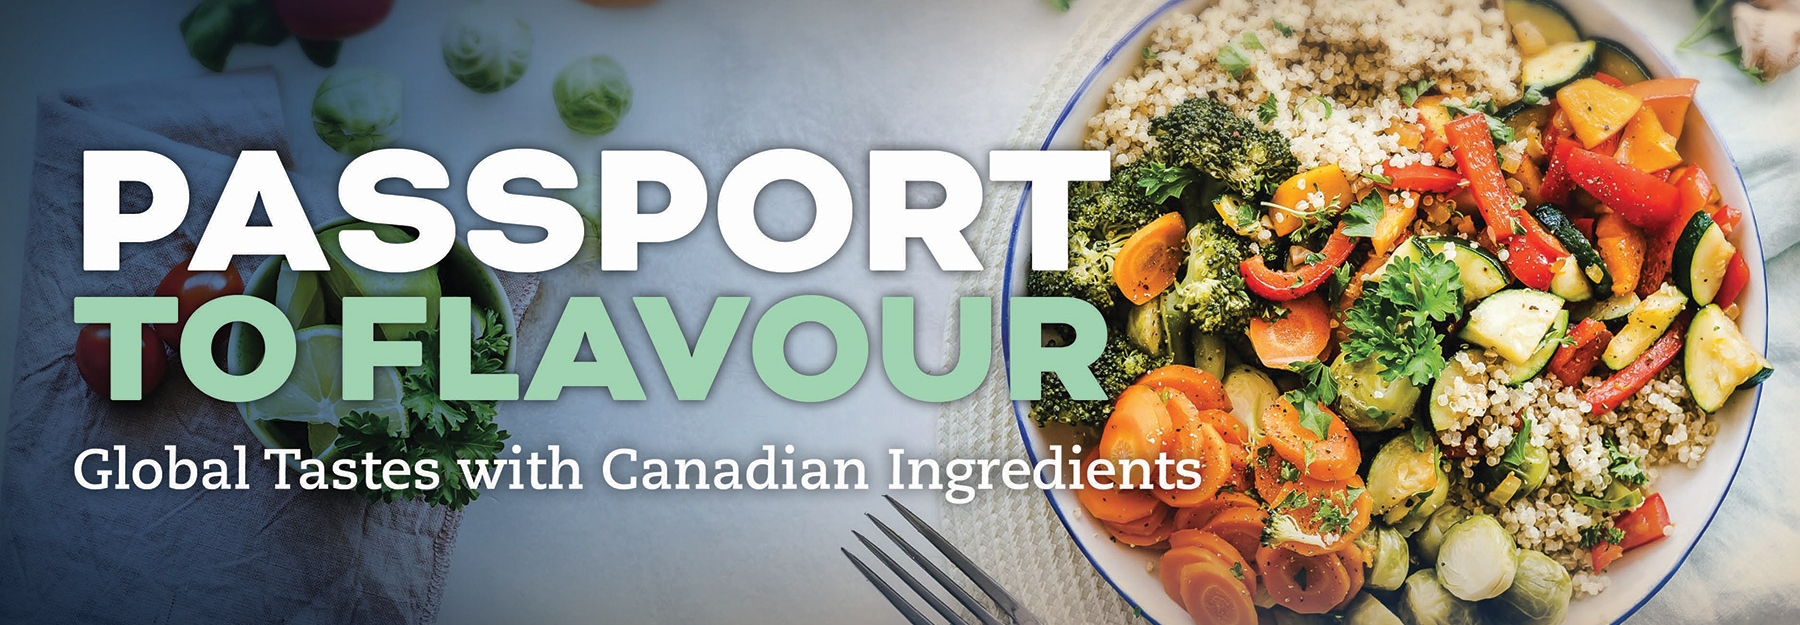 Passport to Flavour - white and green text on blue gradient background with a photo of a vegetable quinoa bowl.